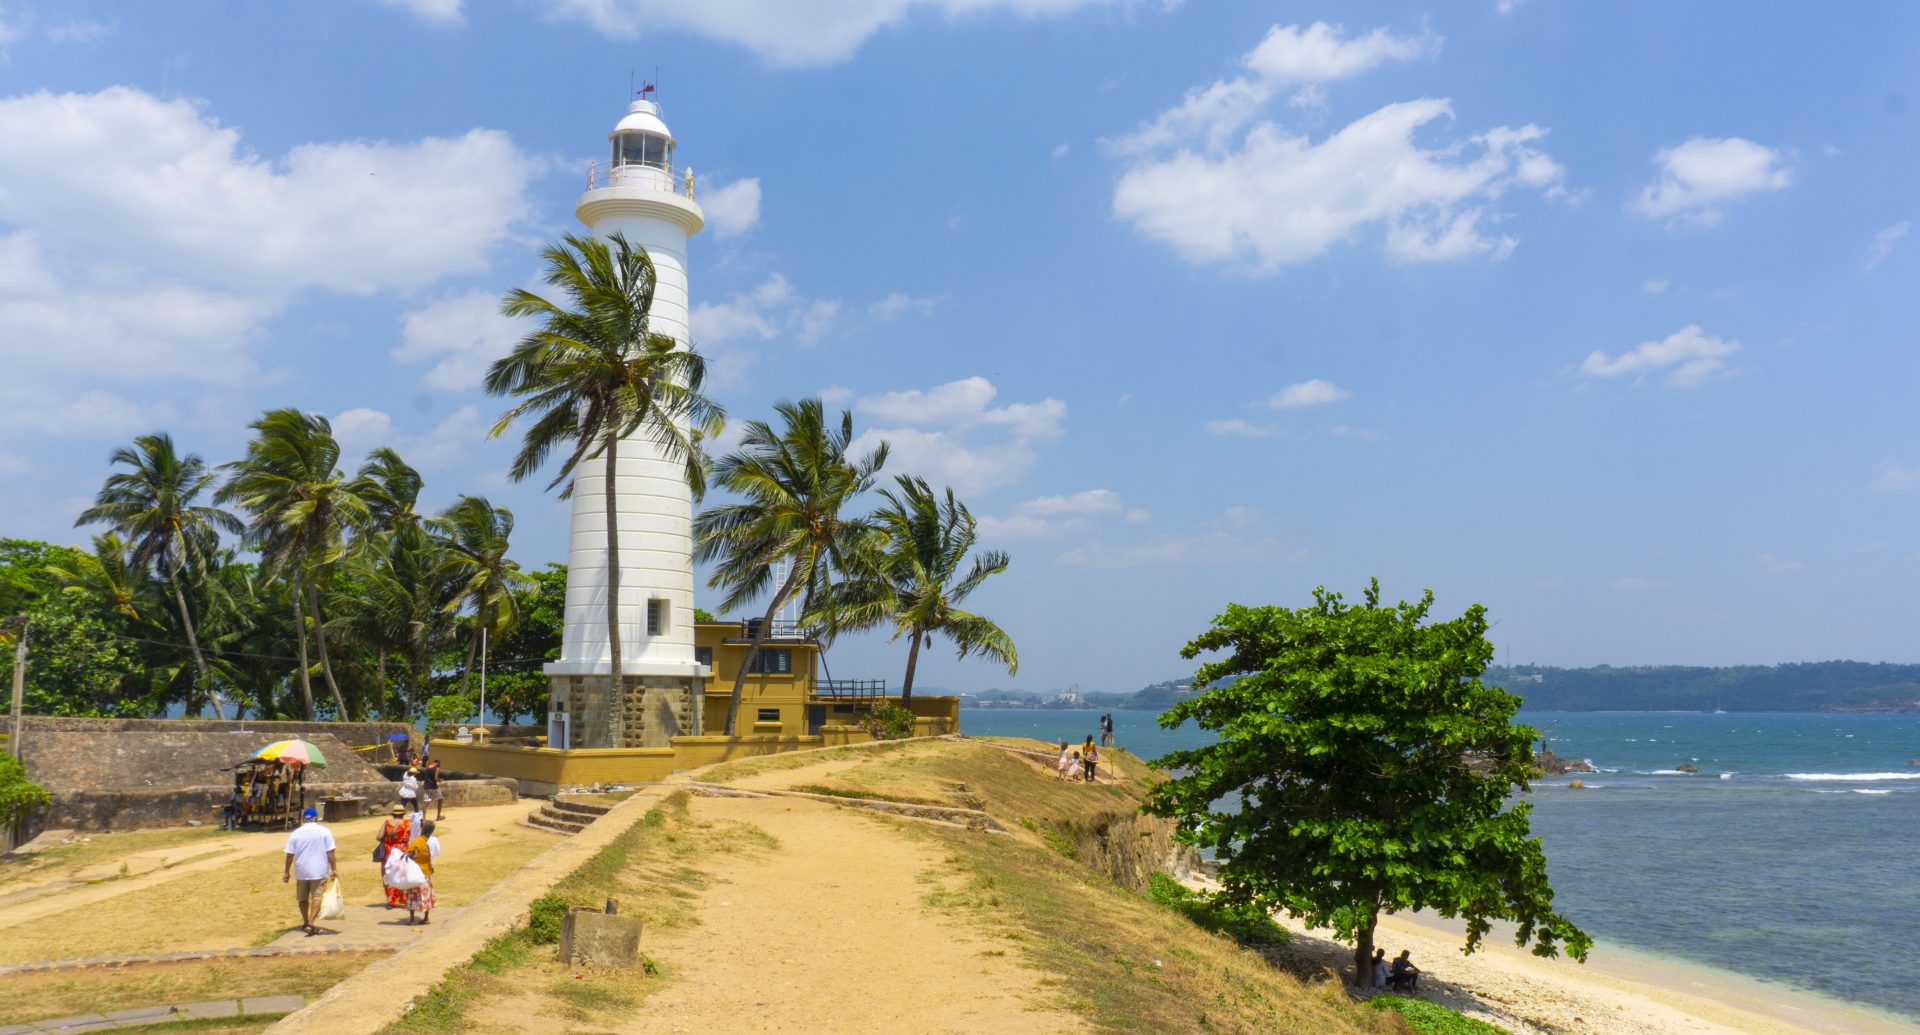 The Lighthouse at Galle Fort